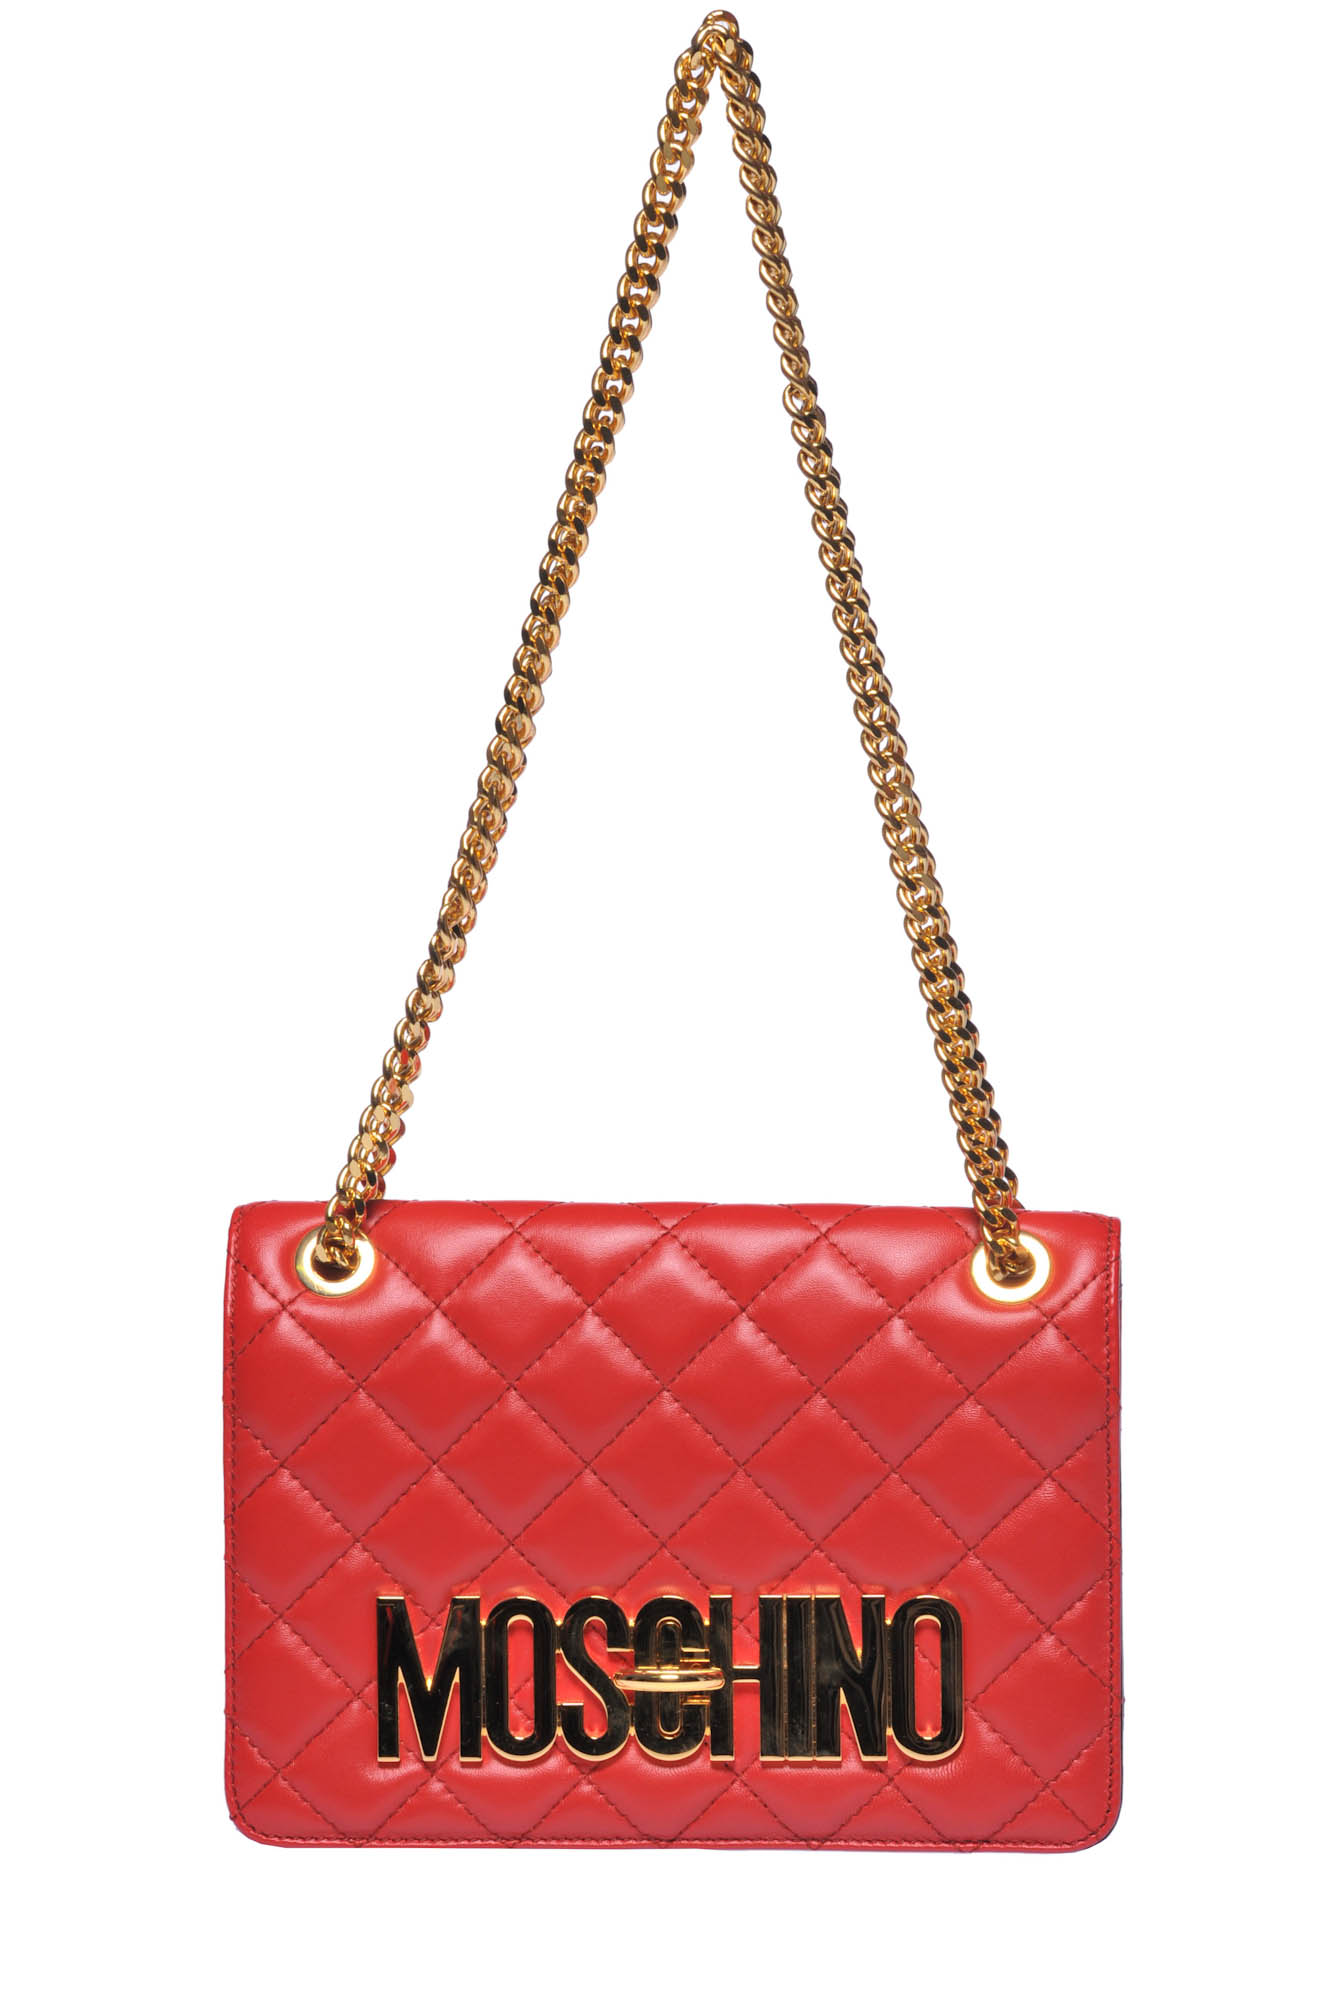 Moschino Couture Quilted leather shoulder bag - Buy online on Glamest ...